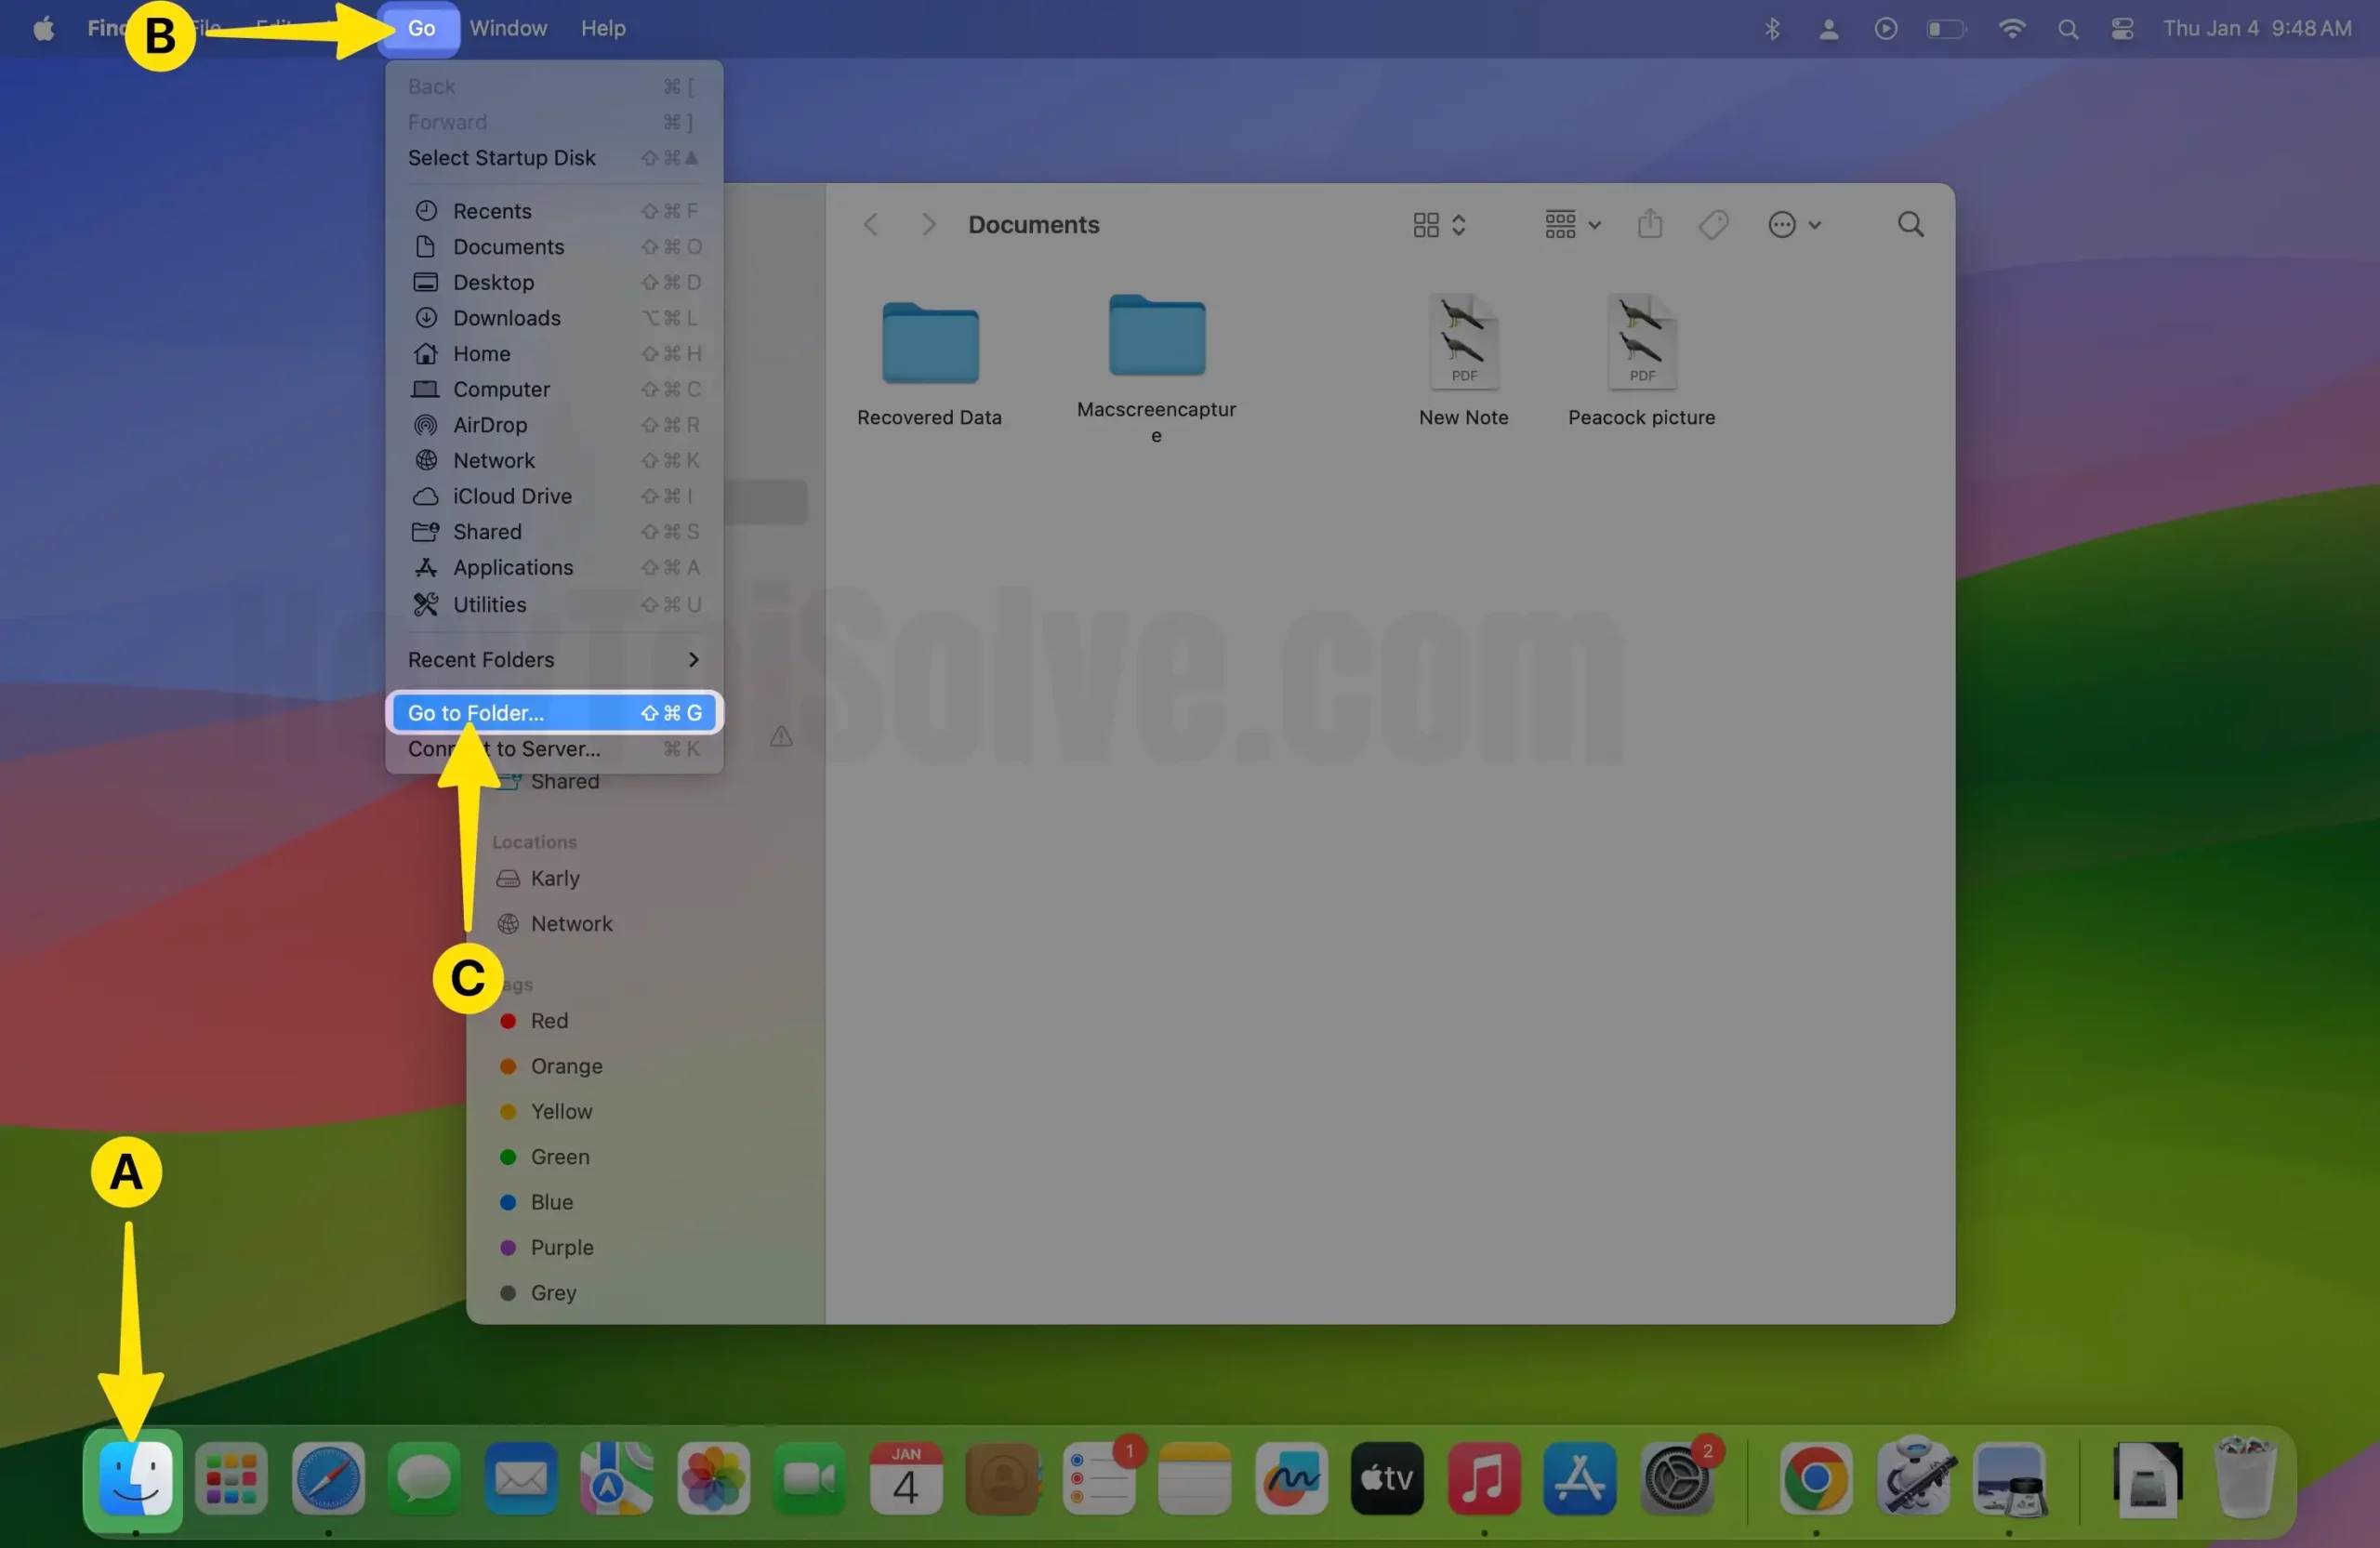 Open Finder Select Go From Top Menubar Choose Go to Folder on Mac